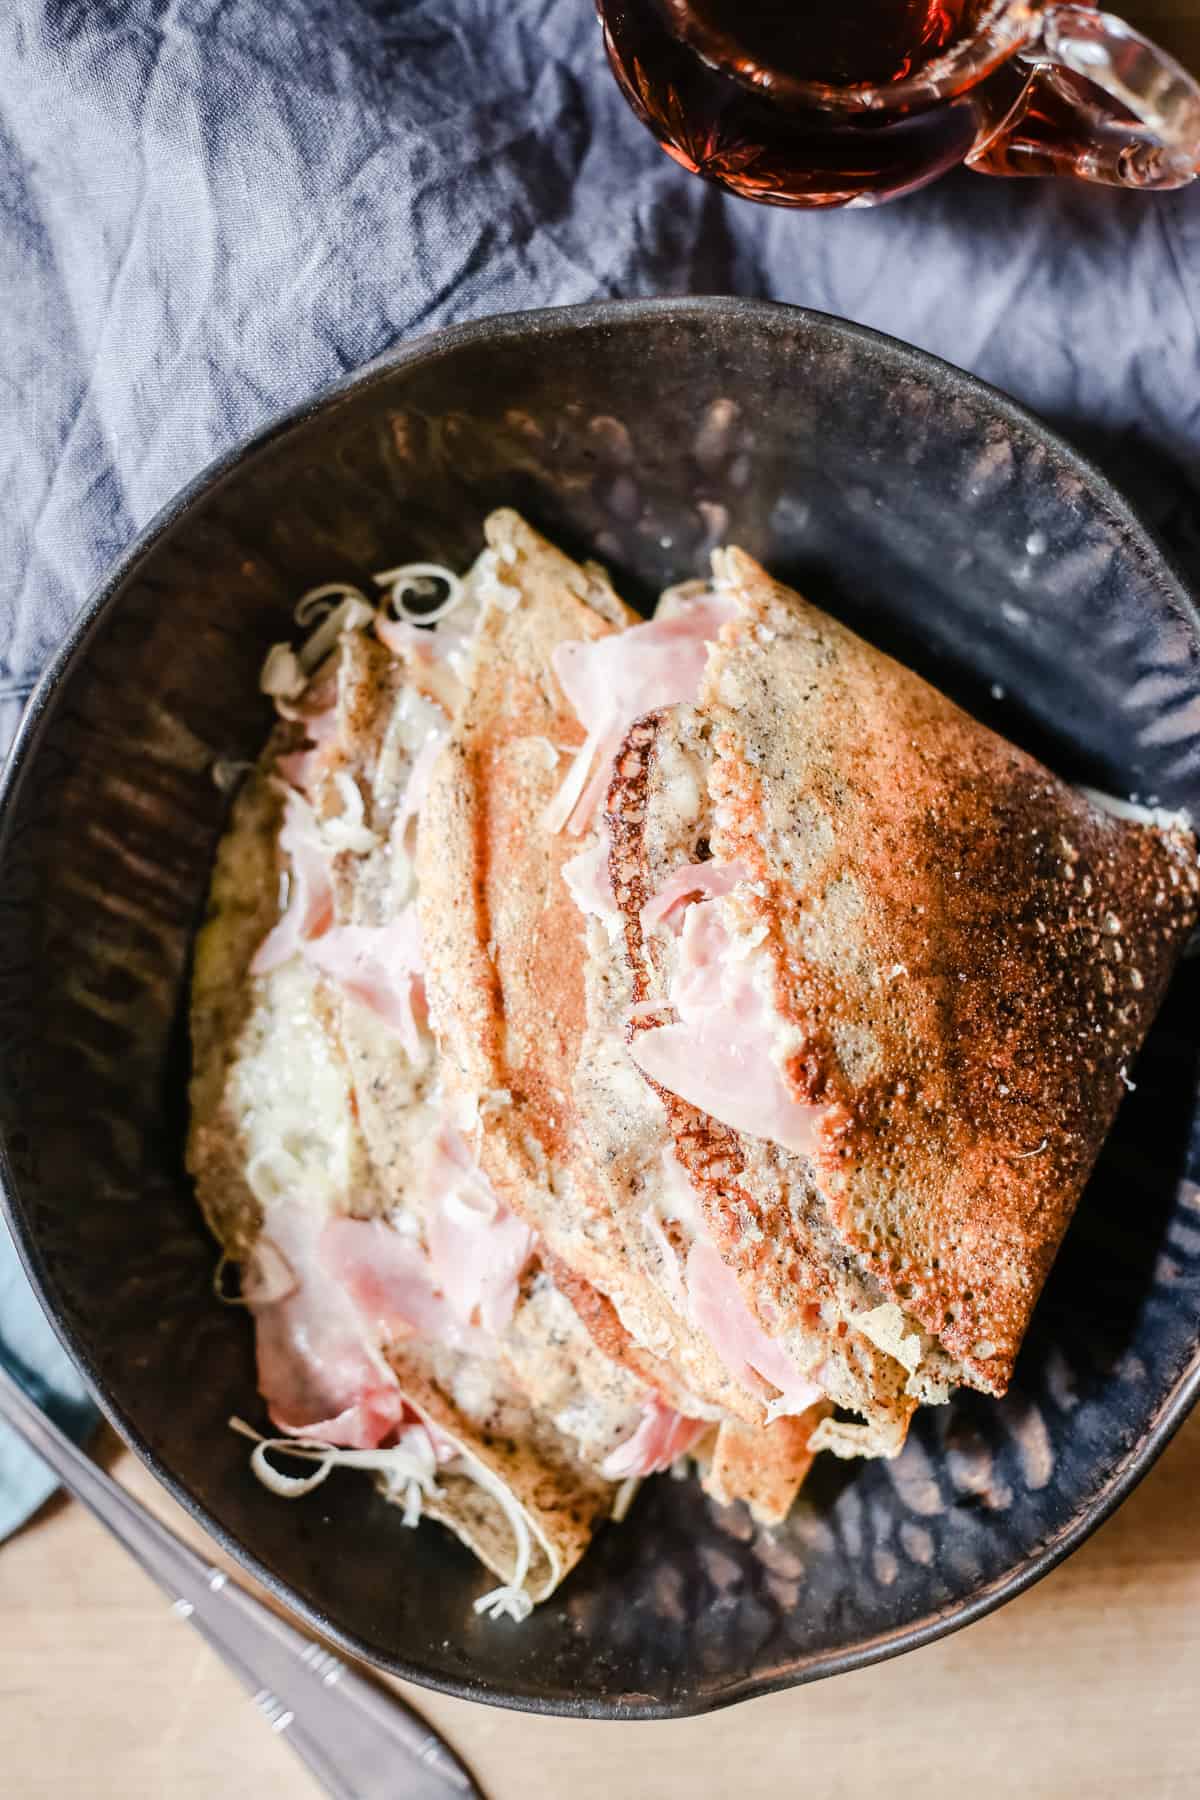 Buckwheat Galettes with ham and cheese in a bowl